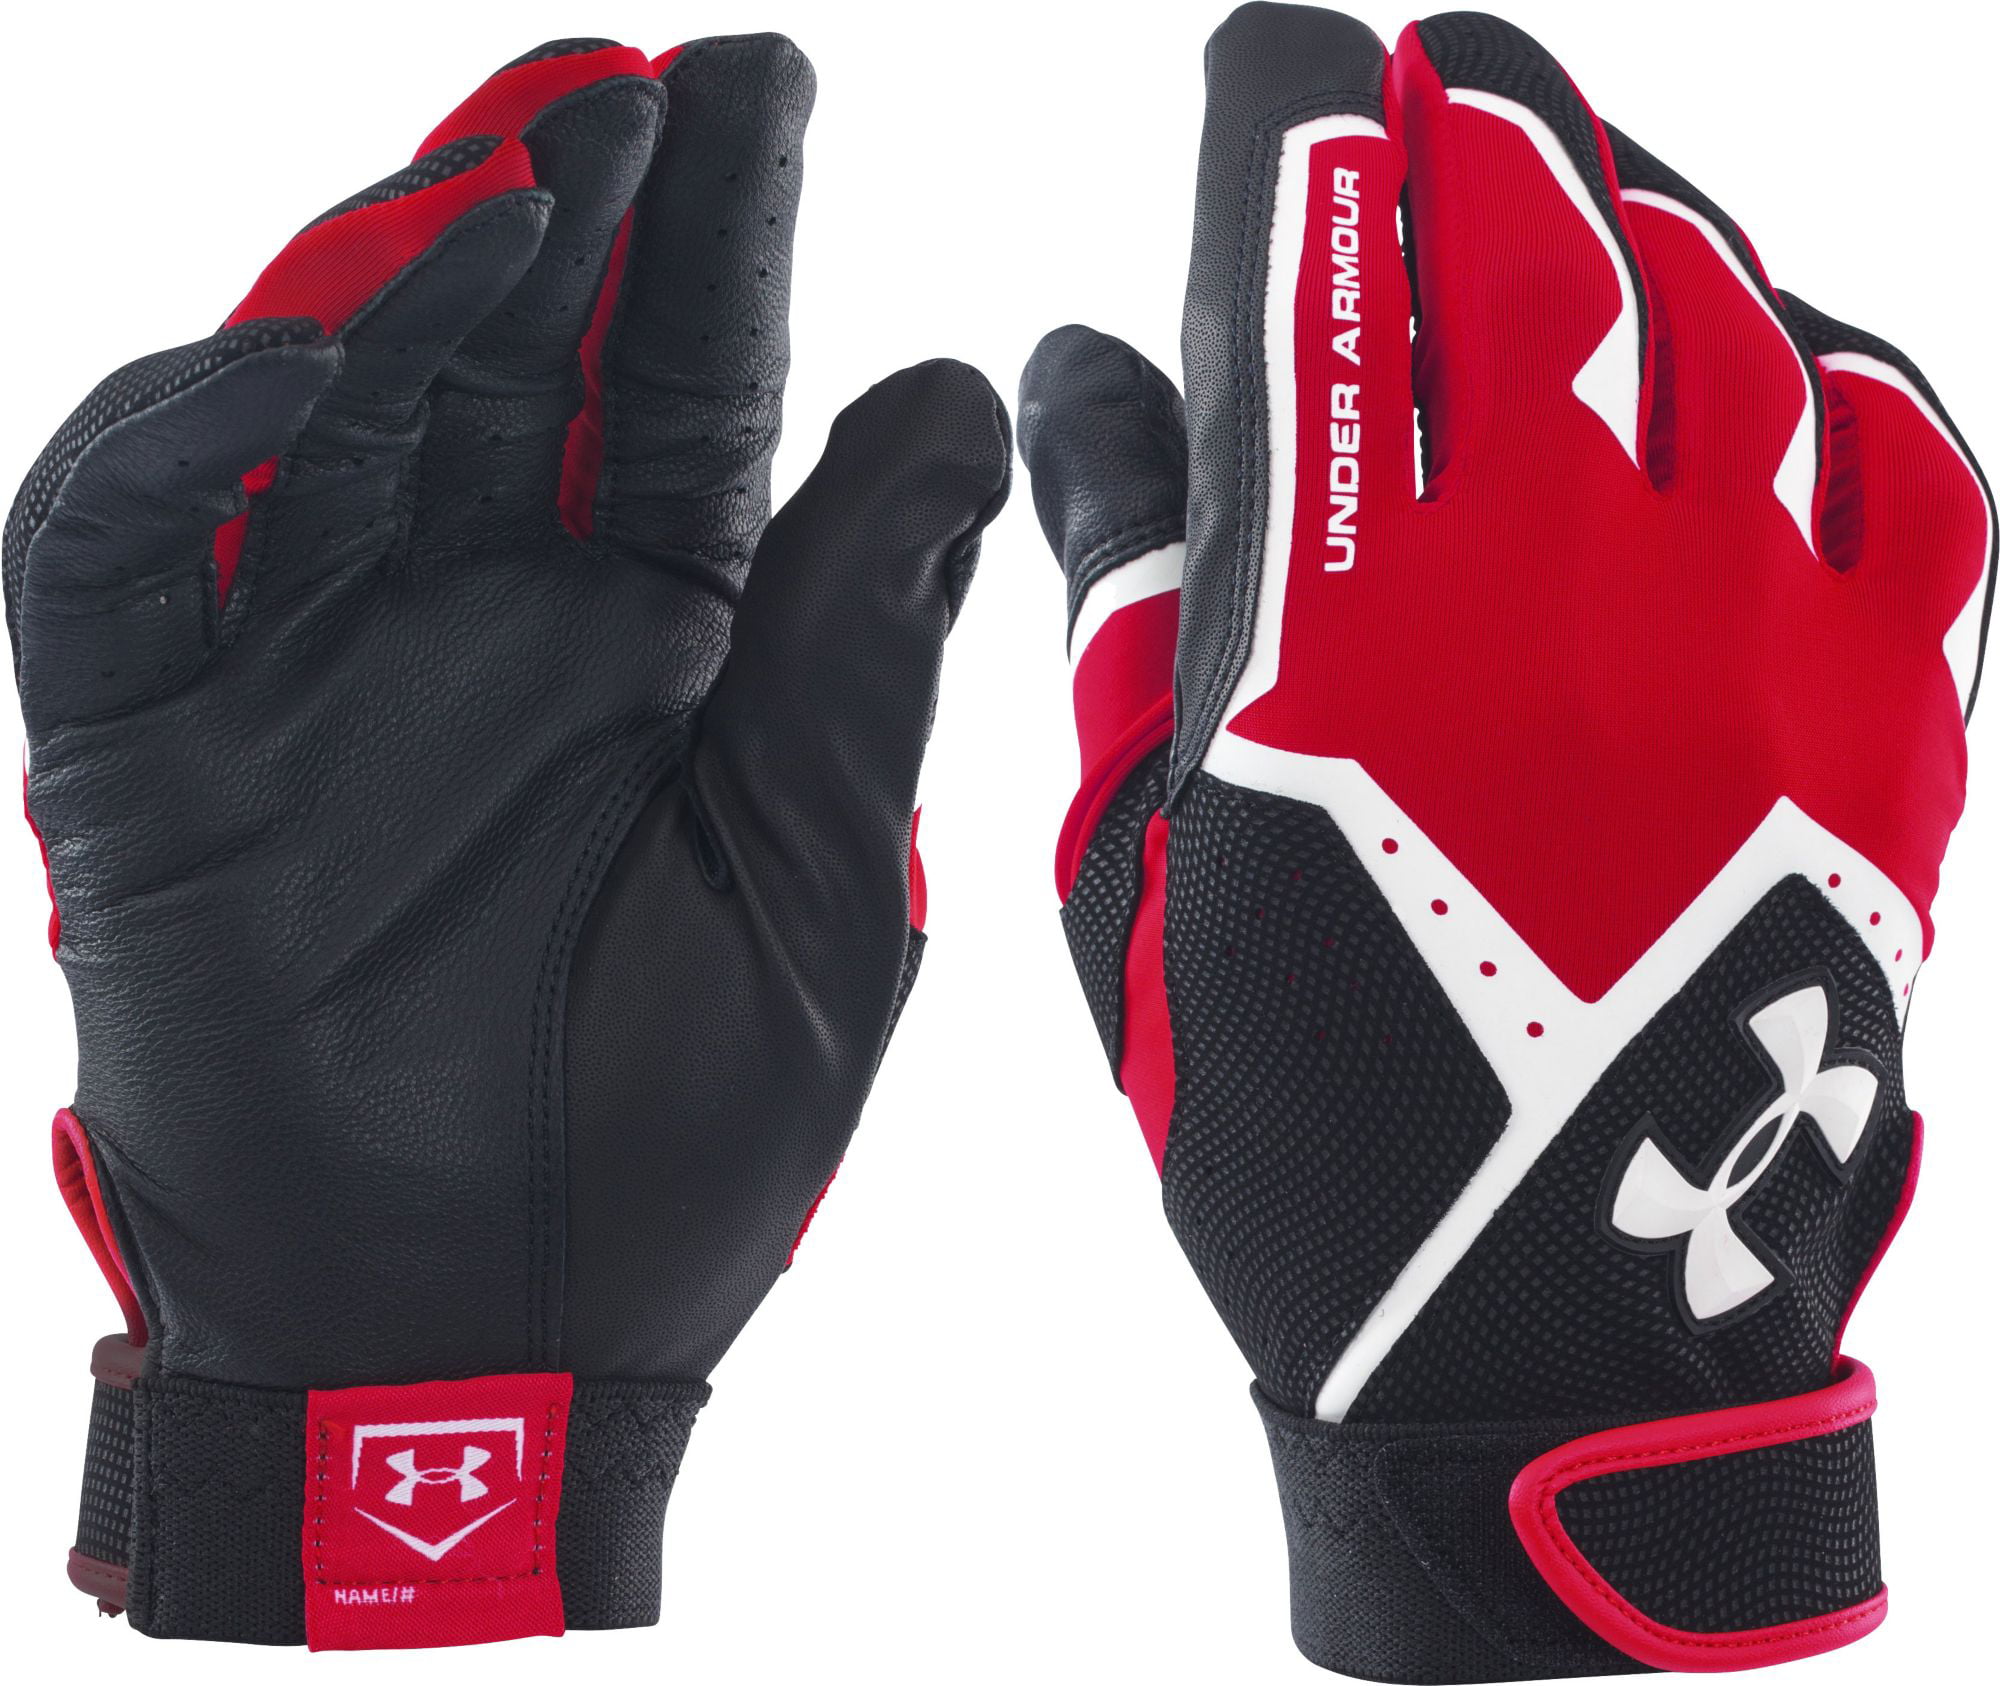 Under Armour Clean Up Youth Batting Gloves Red/Black/White Size Youth Large 